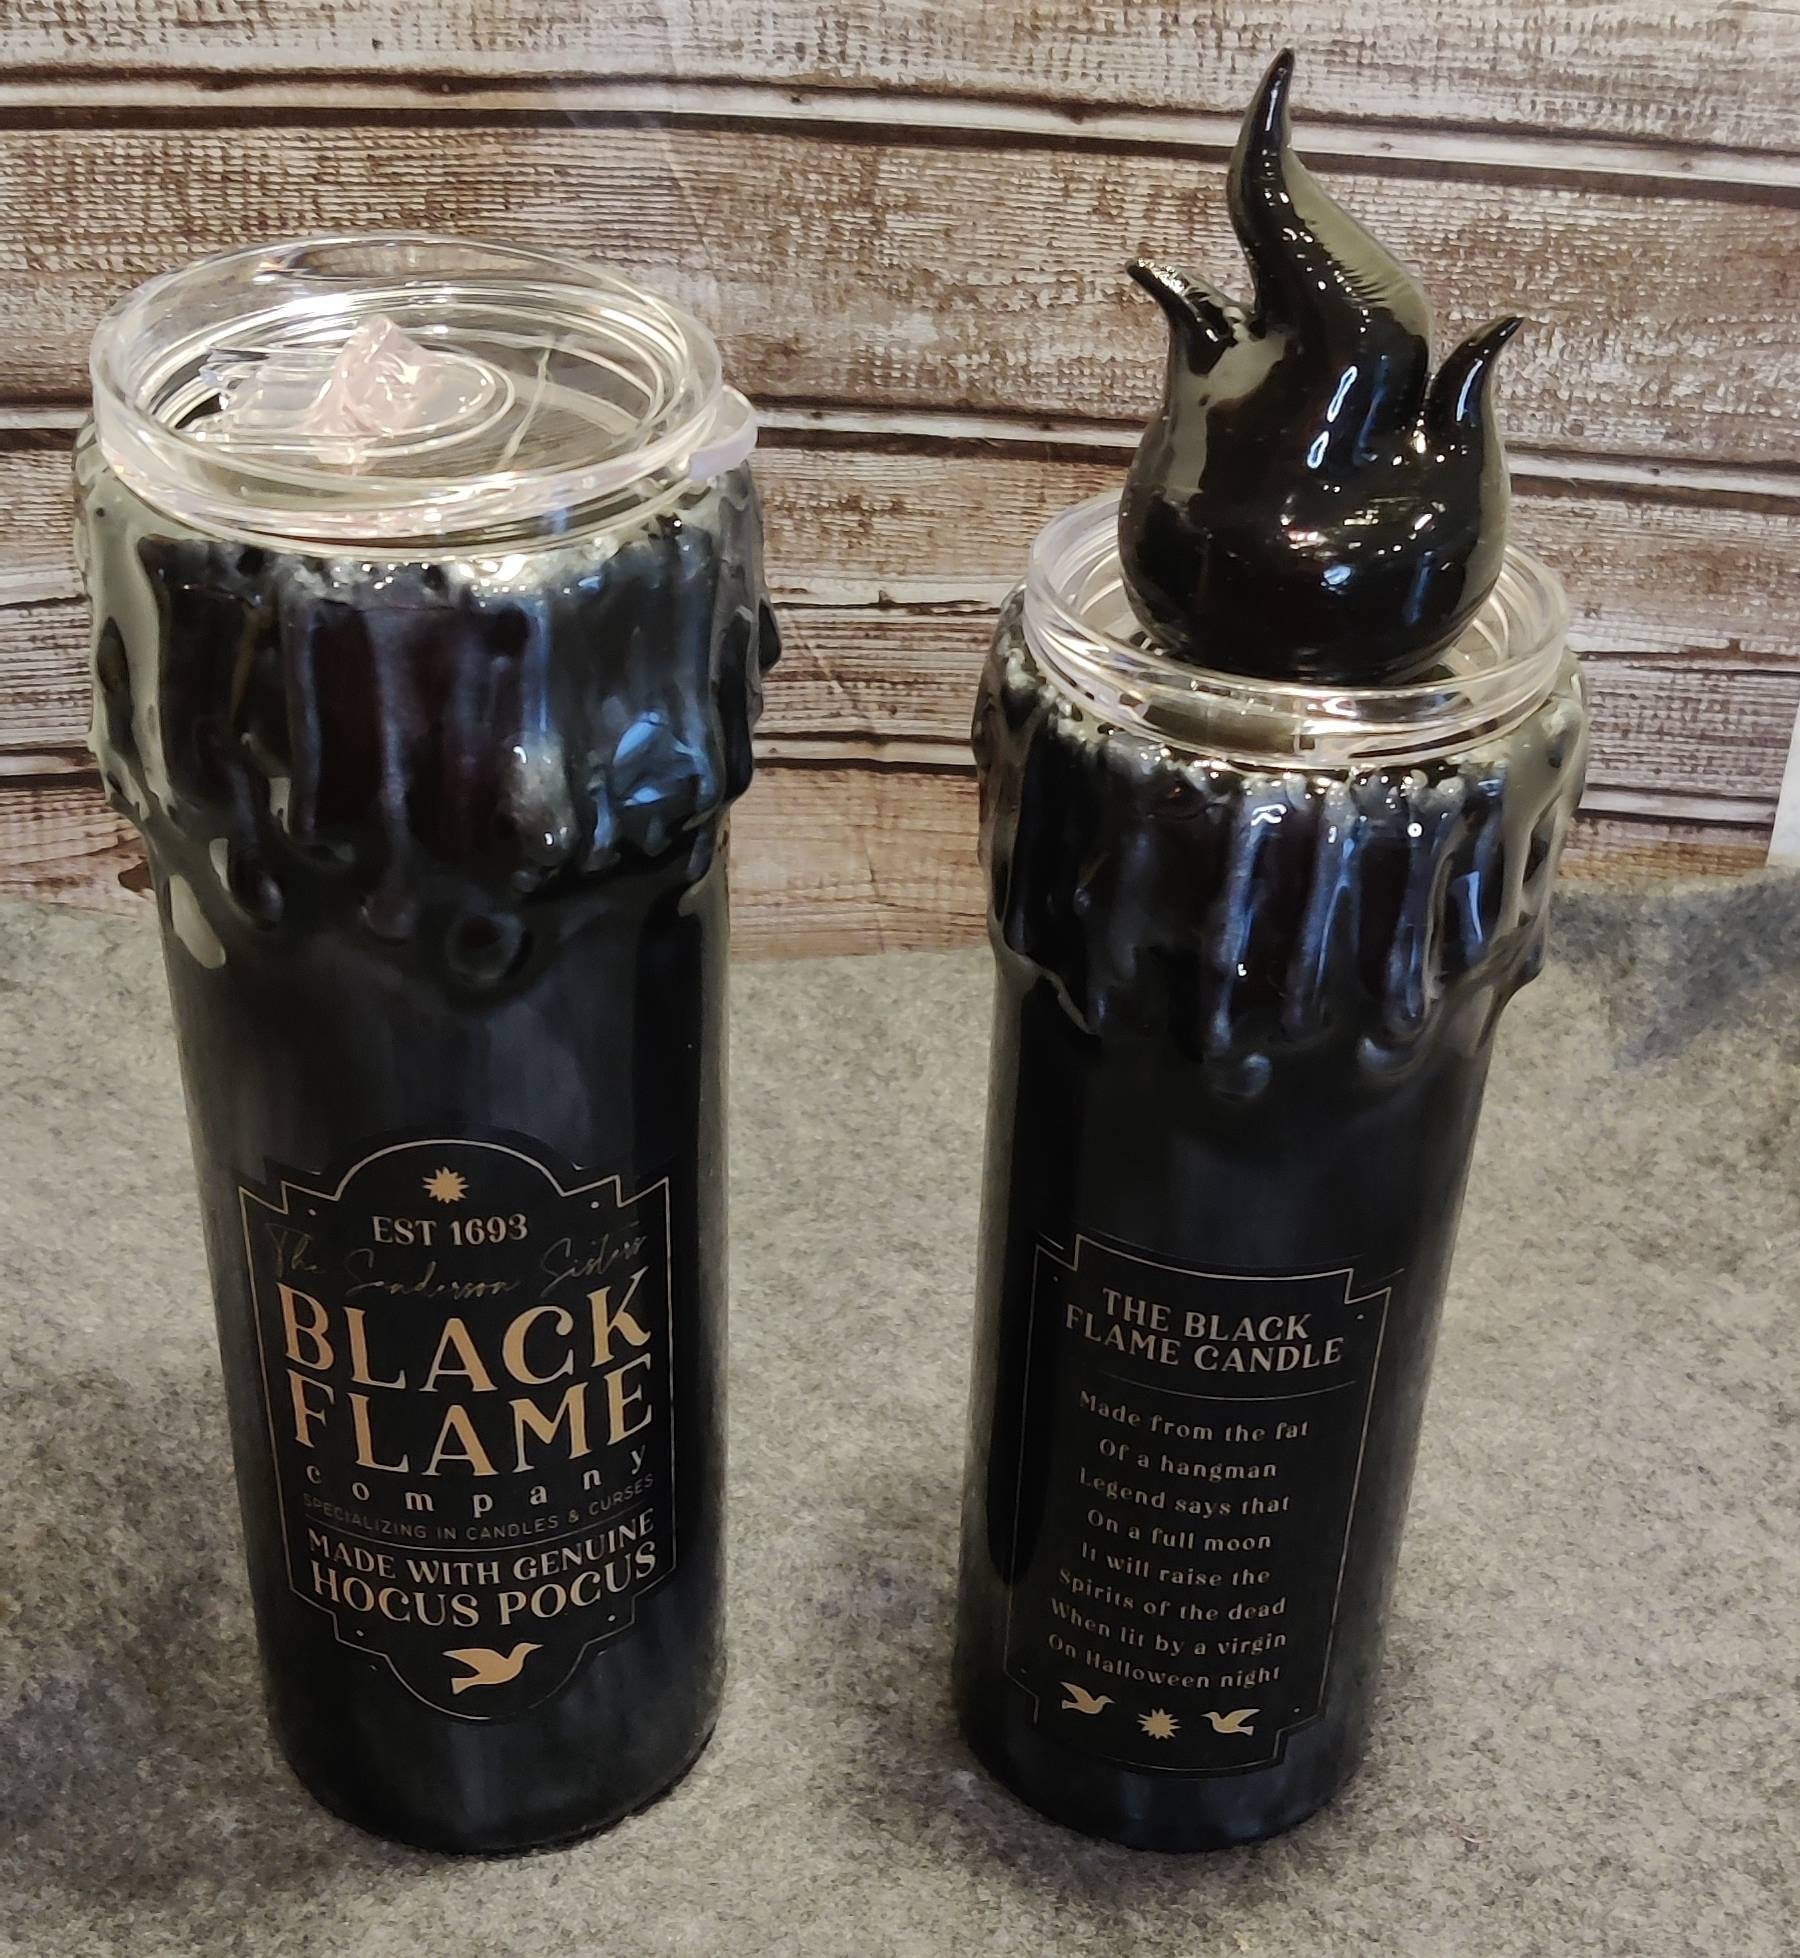 Black Flame Candle Wax Melts – zombieloungeonline